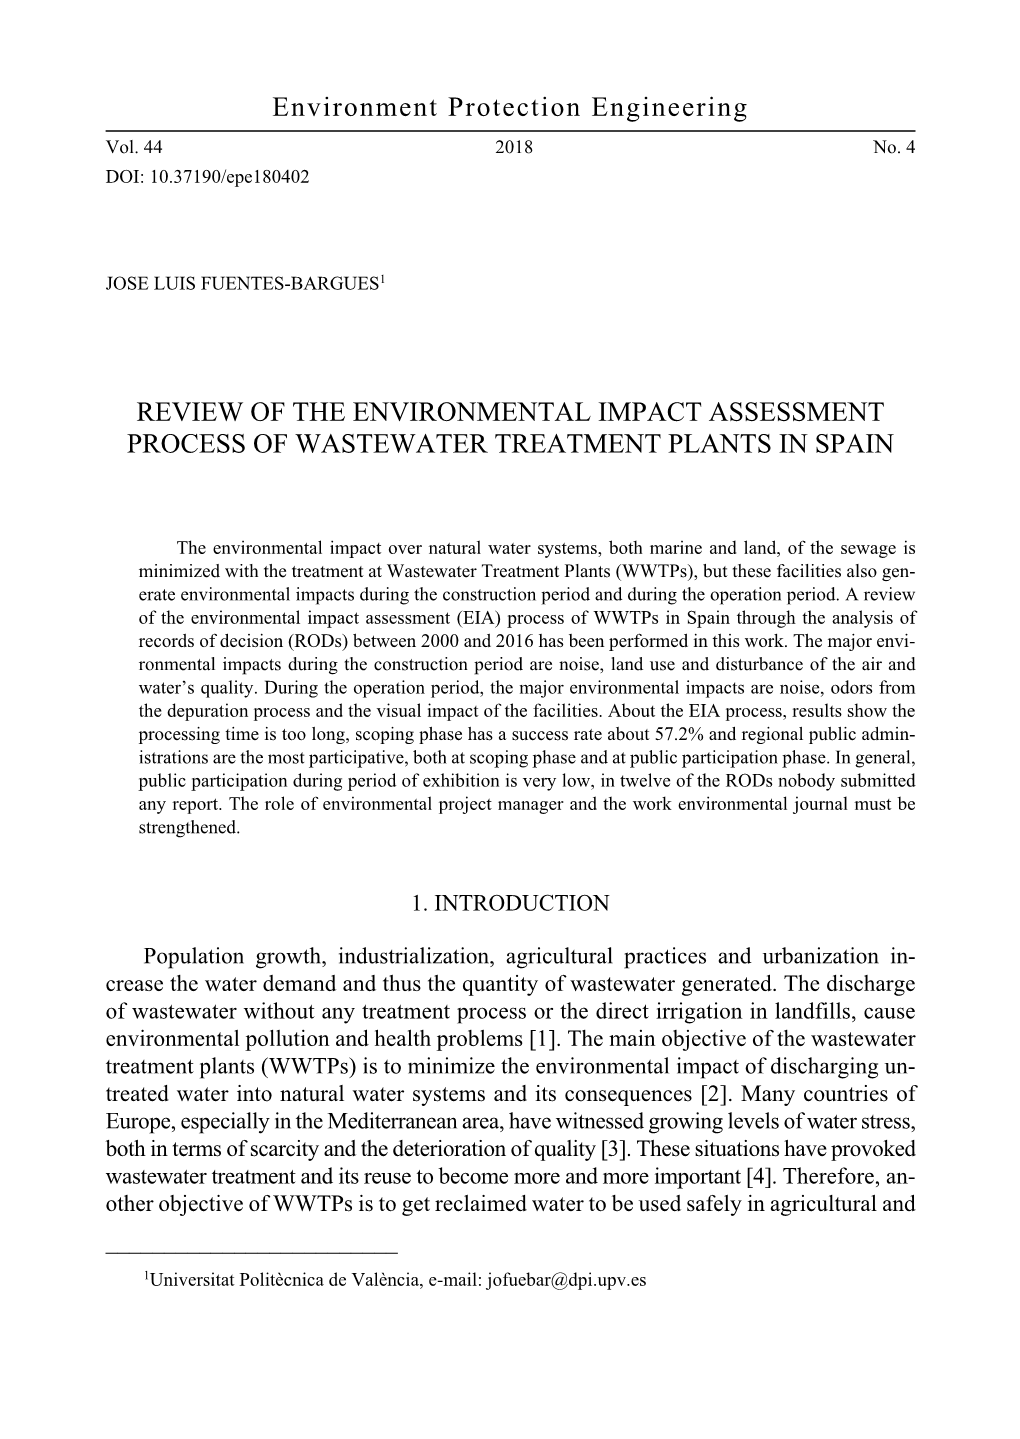 Environment Protection Engineering REVIEW of the ENVIRONMENTAL IMPACT ASSESSMENT PROCESS of WASTEWATER TREATMENT PLANTS in SPAIN